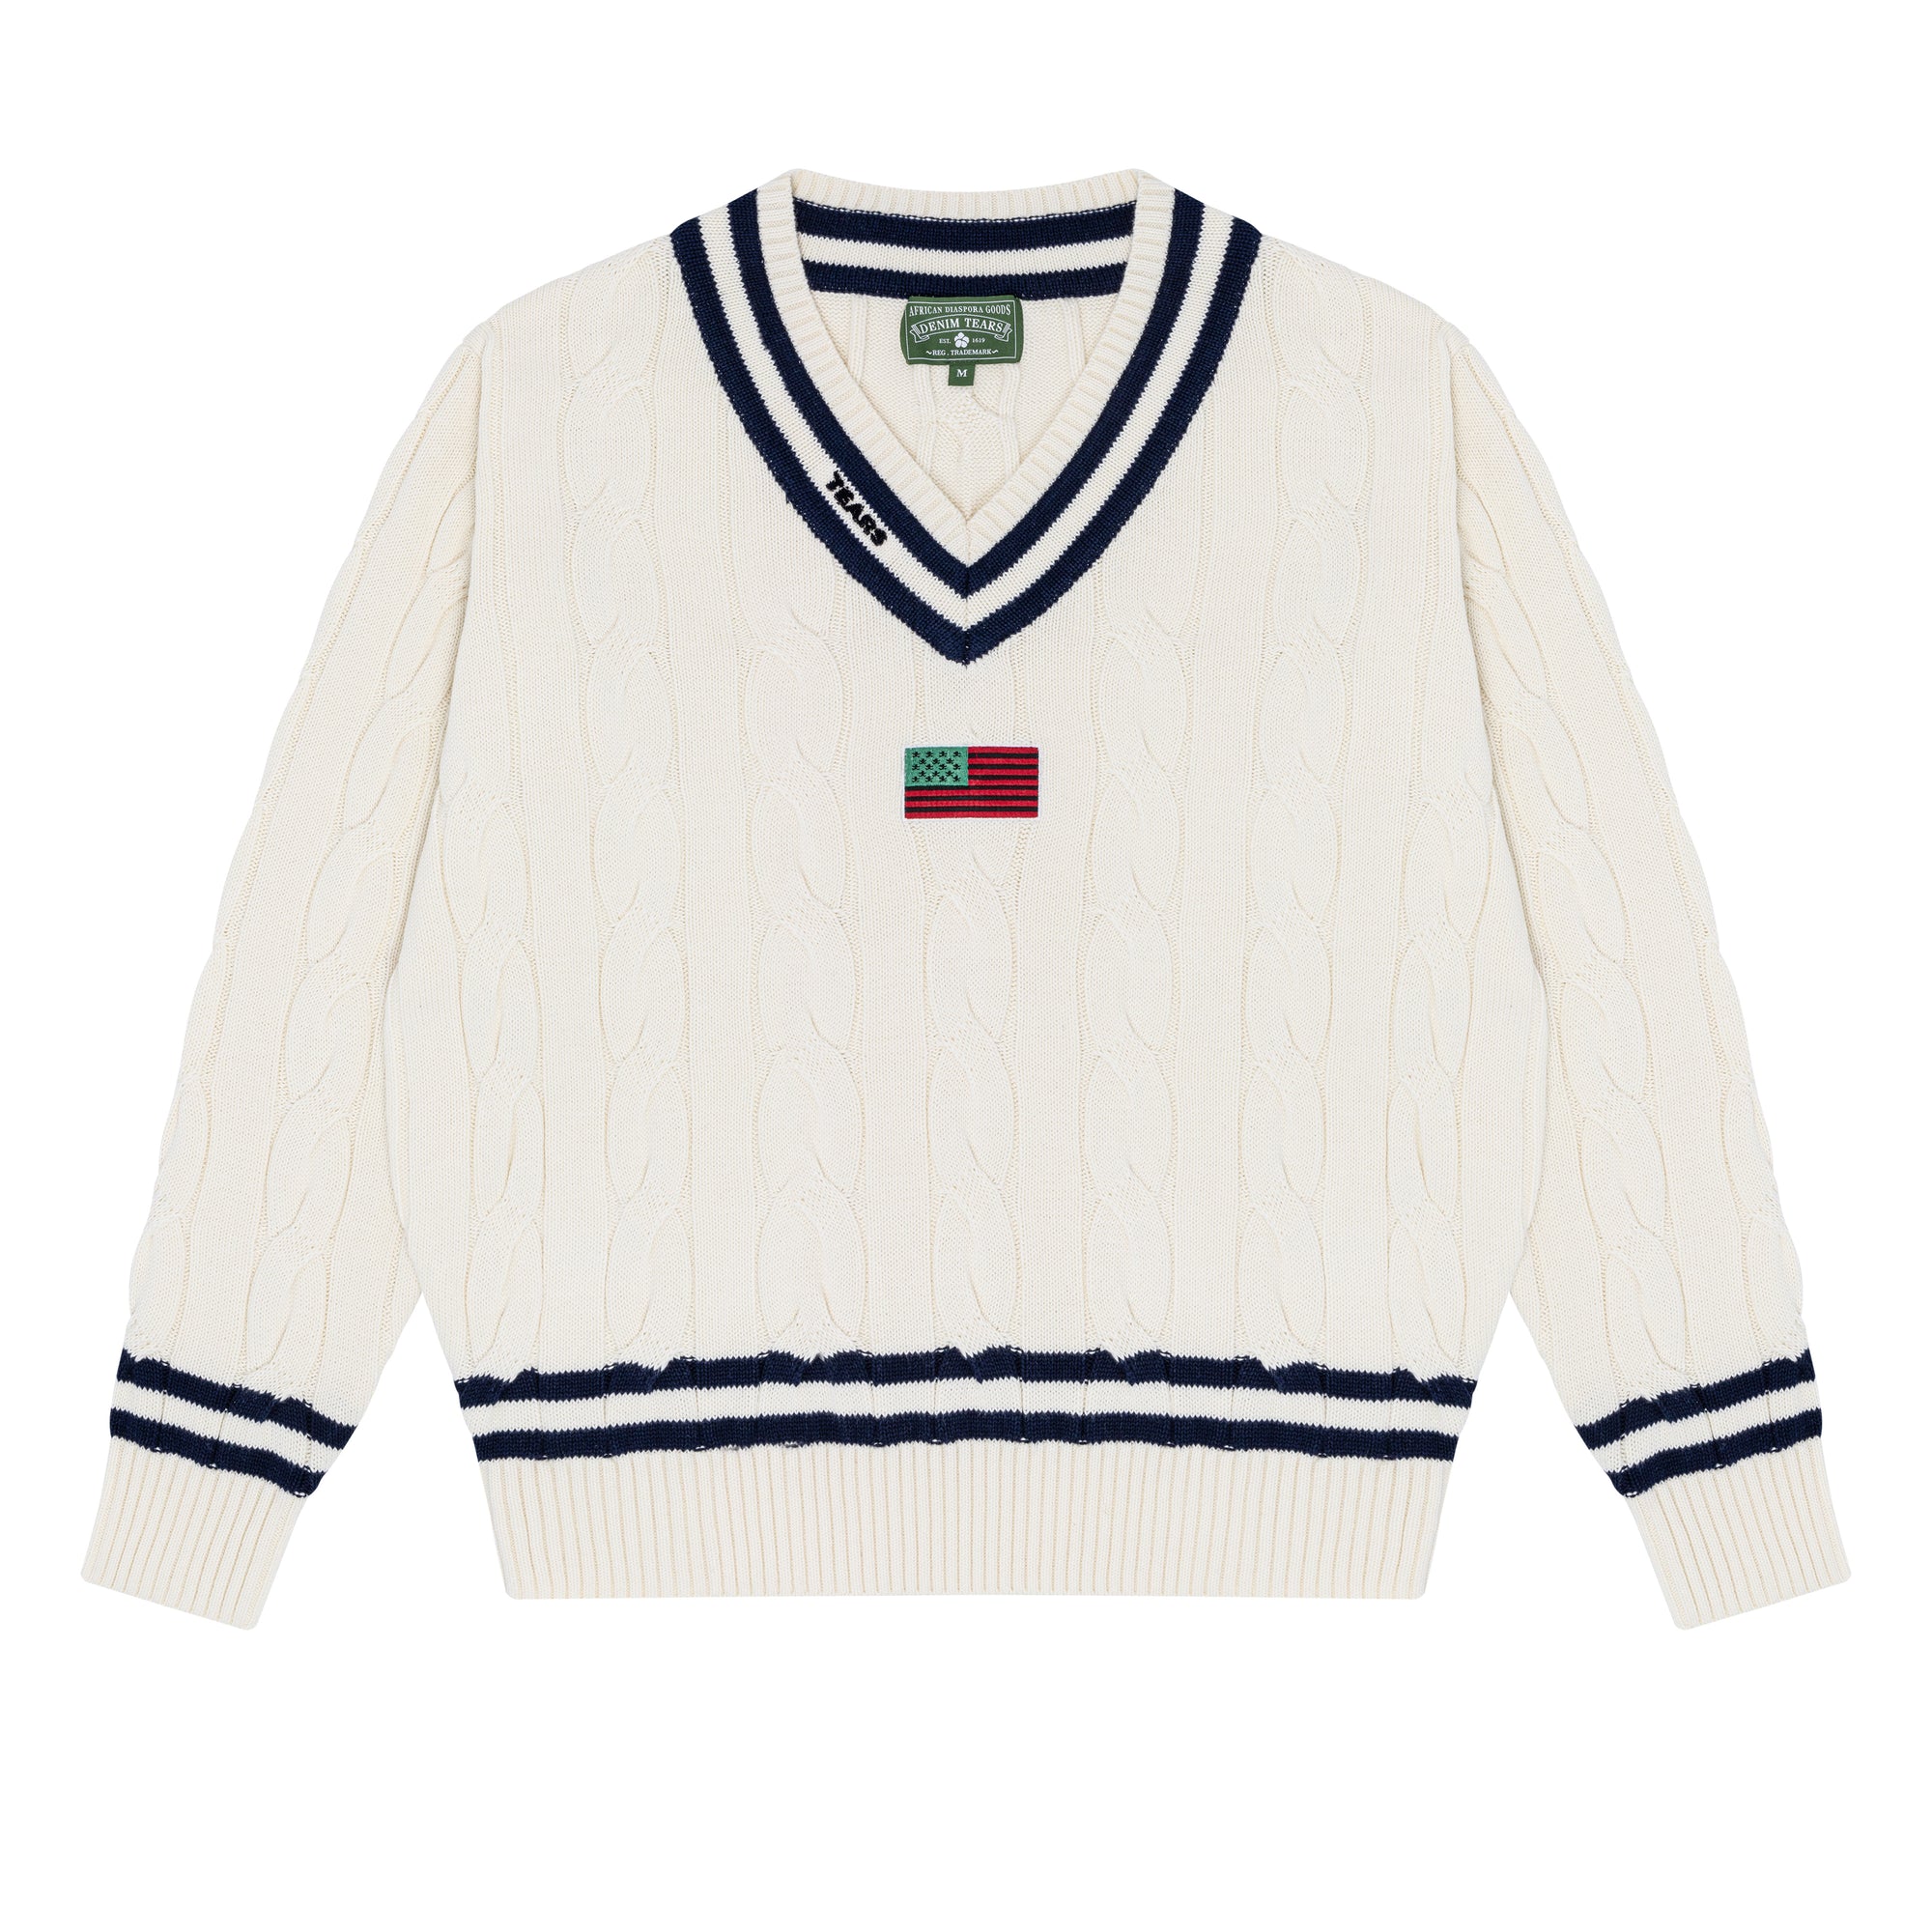 Denim Tears - Pan-African Flag Cricket Sweater - (White) view 1